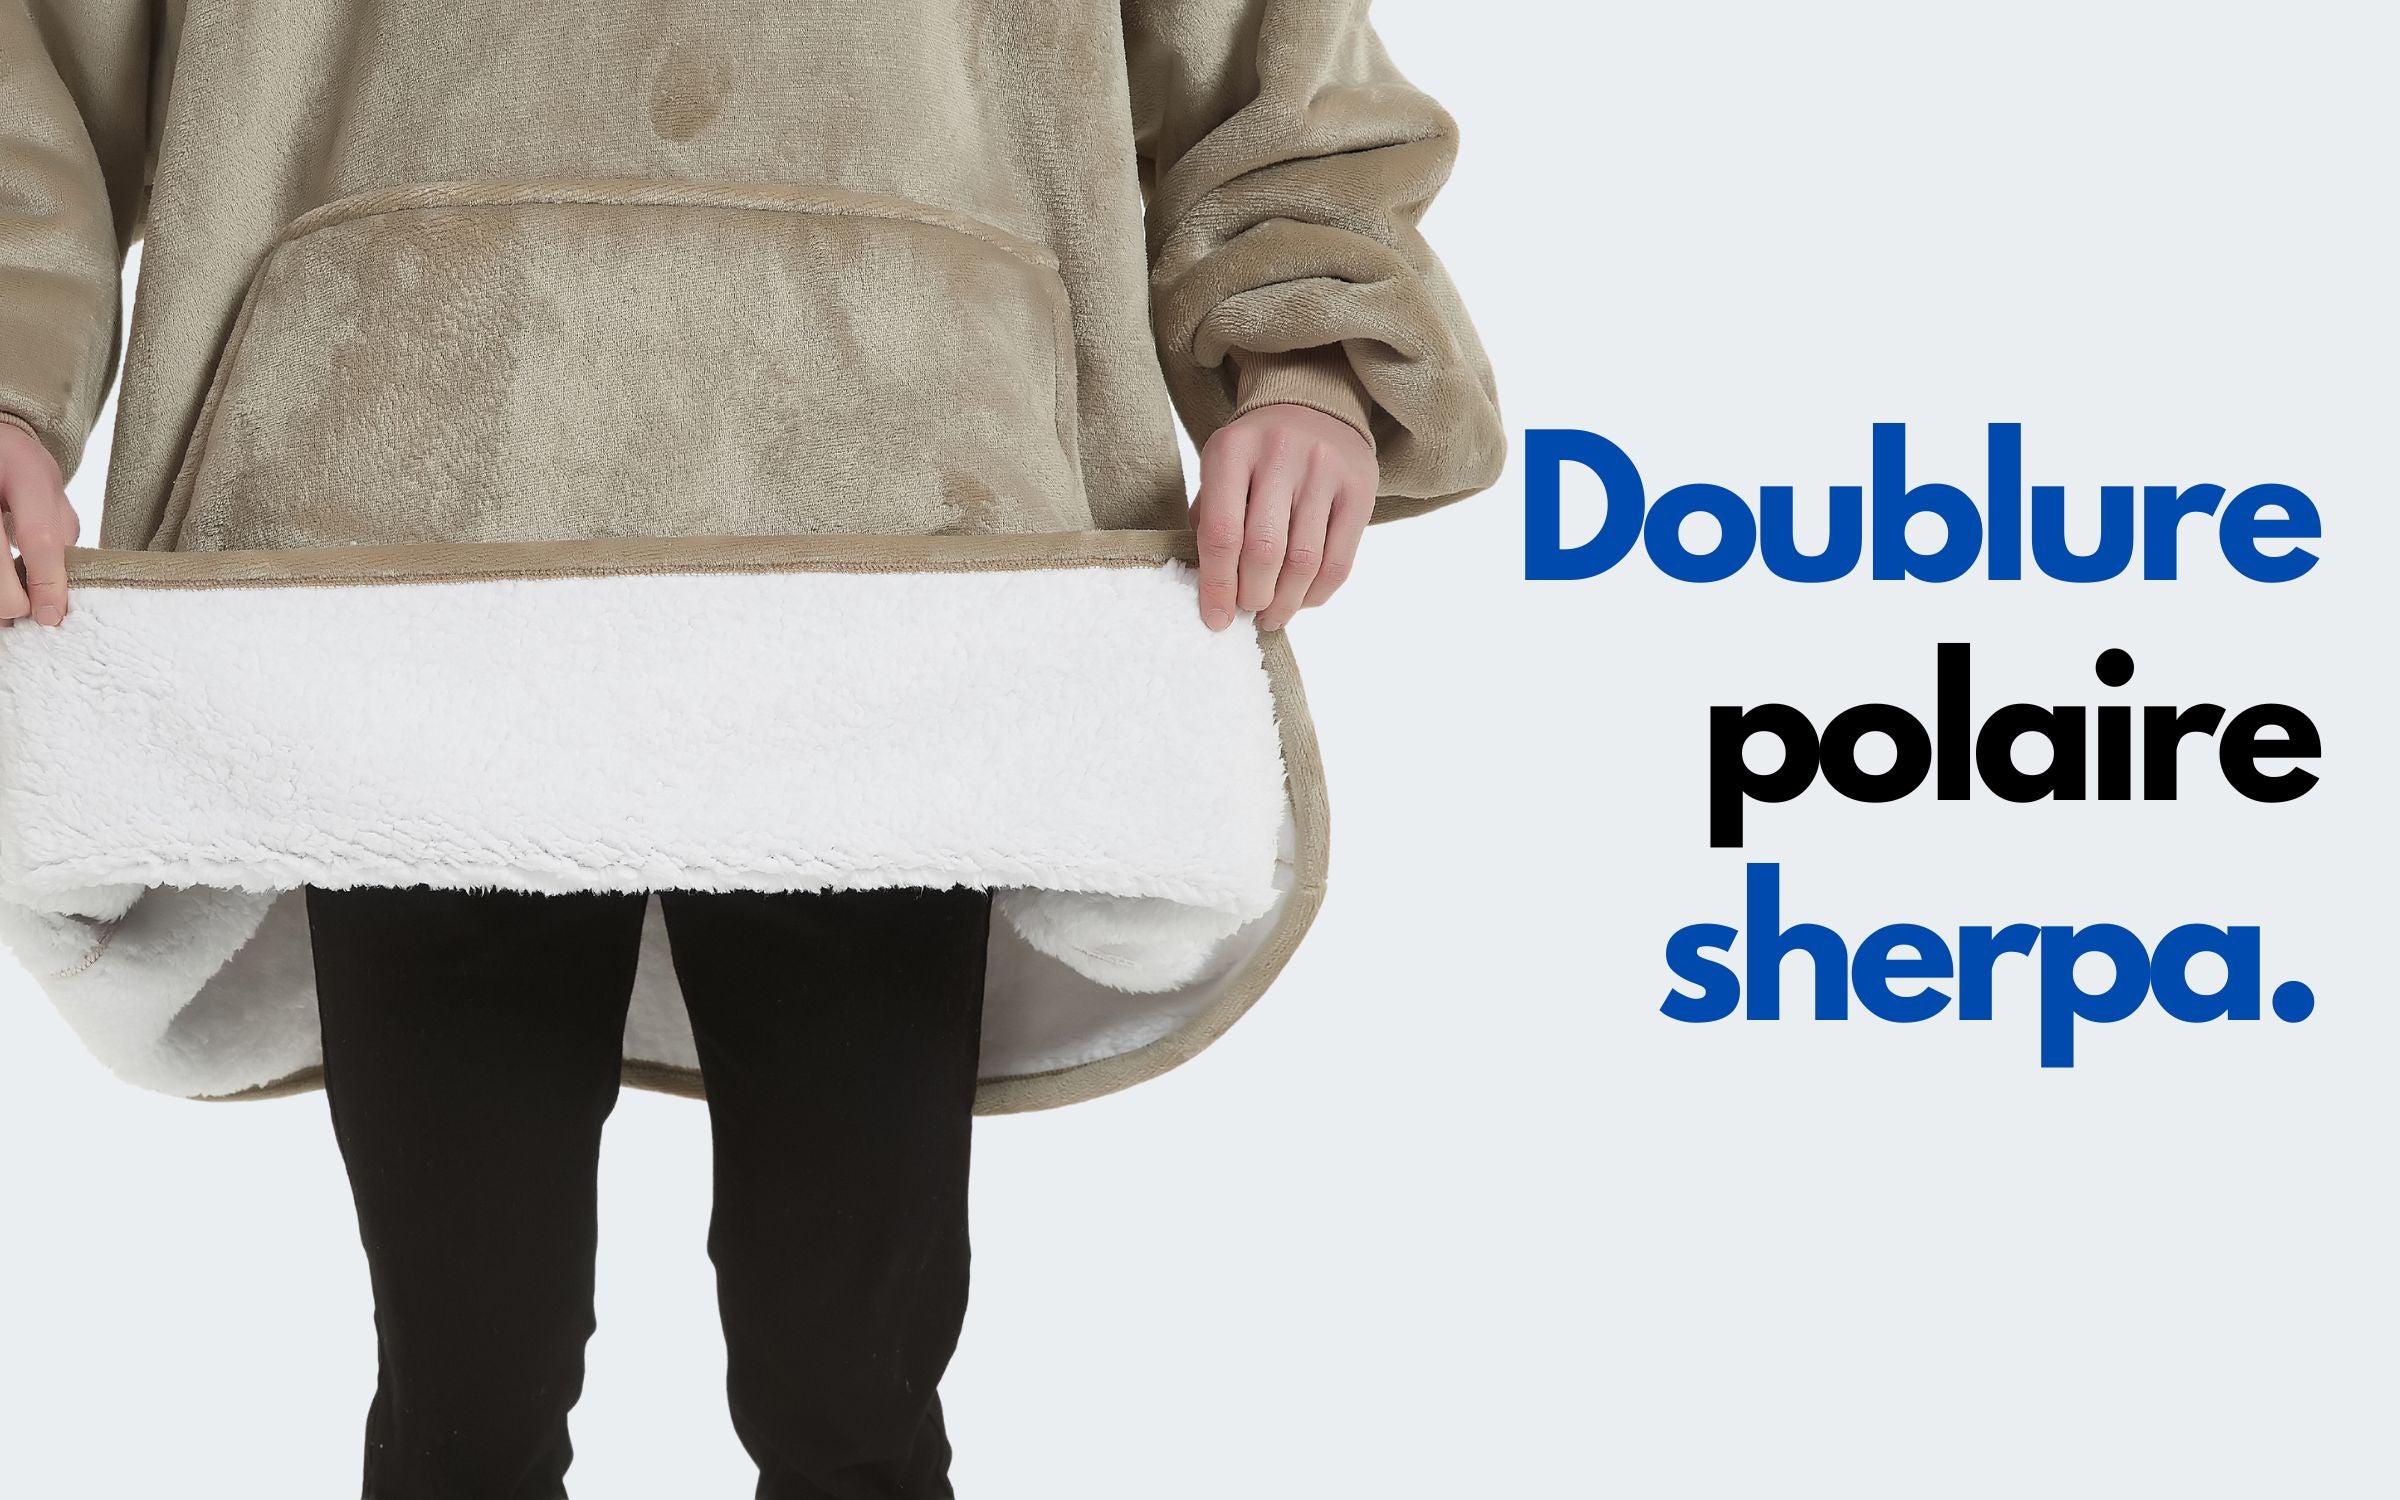 Doublure Polaire Sherpa chaude moelleuse cozy The Oversized Hoodie Homme Beige